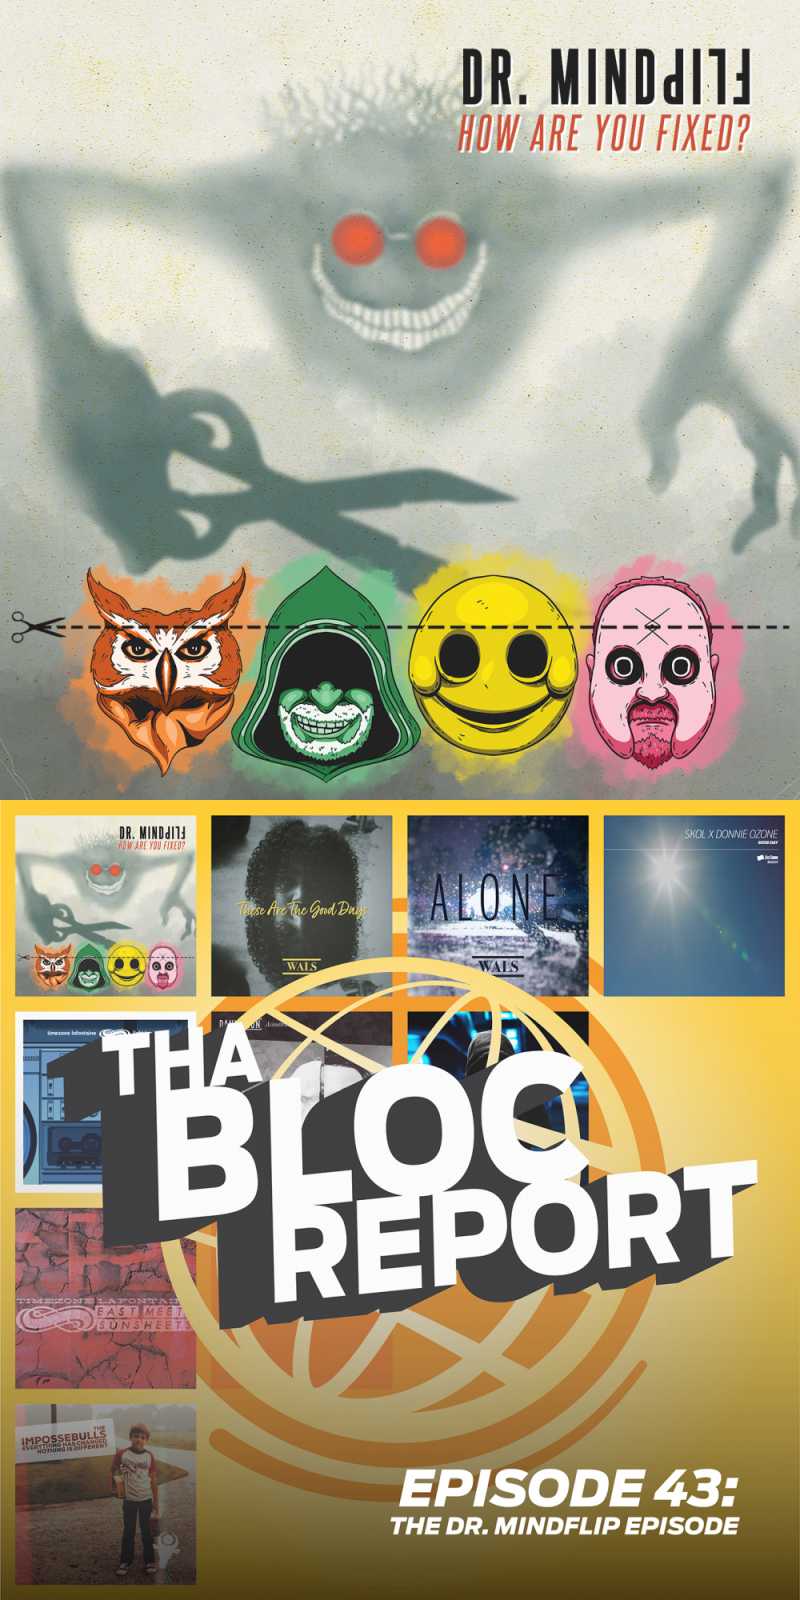 Image containing cover of Dr. Mindflip’s new album “How are you fixed?” and graphic representing Episode 43 of Tha Bloc Report